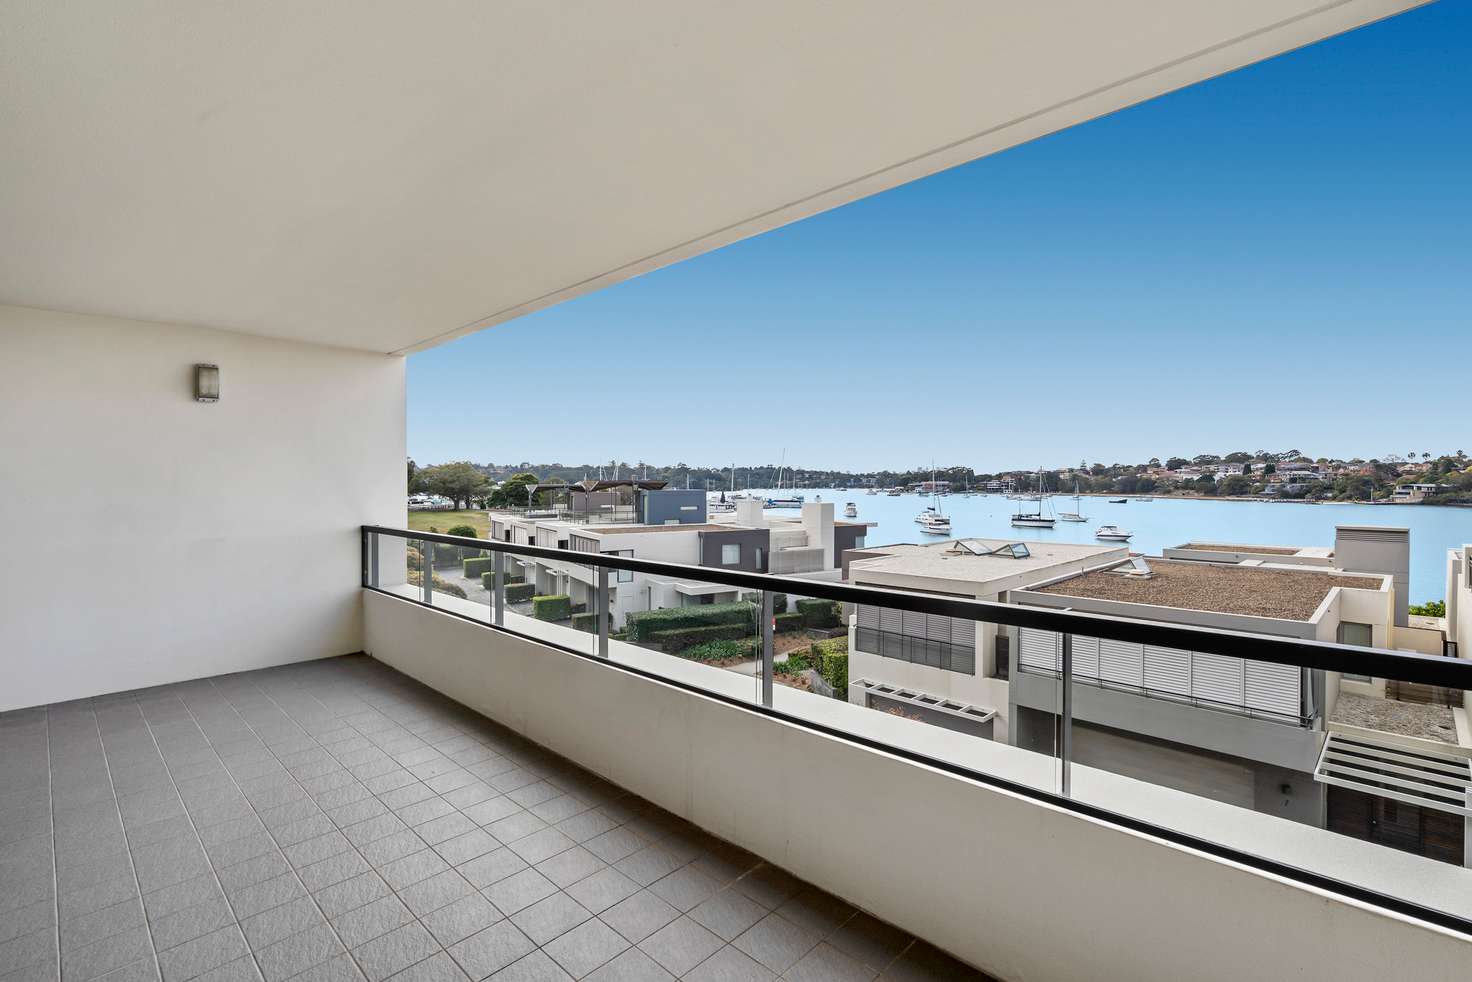 Main view of Homely apartment listing, 22/18 Edgewood Crescent, Cabarita NSW 2137